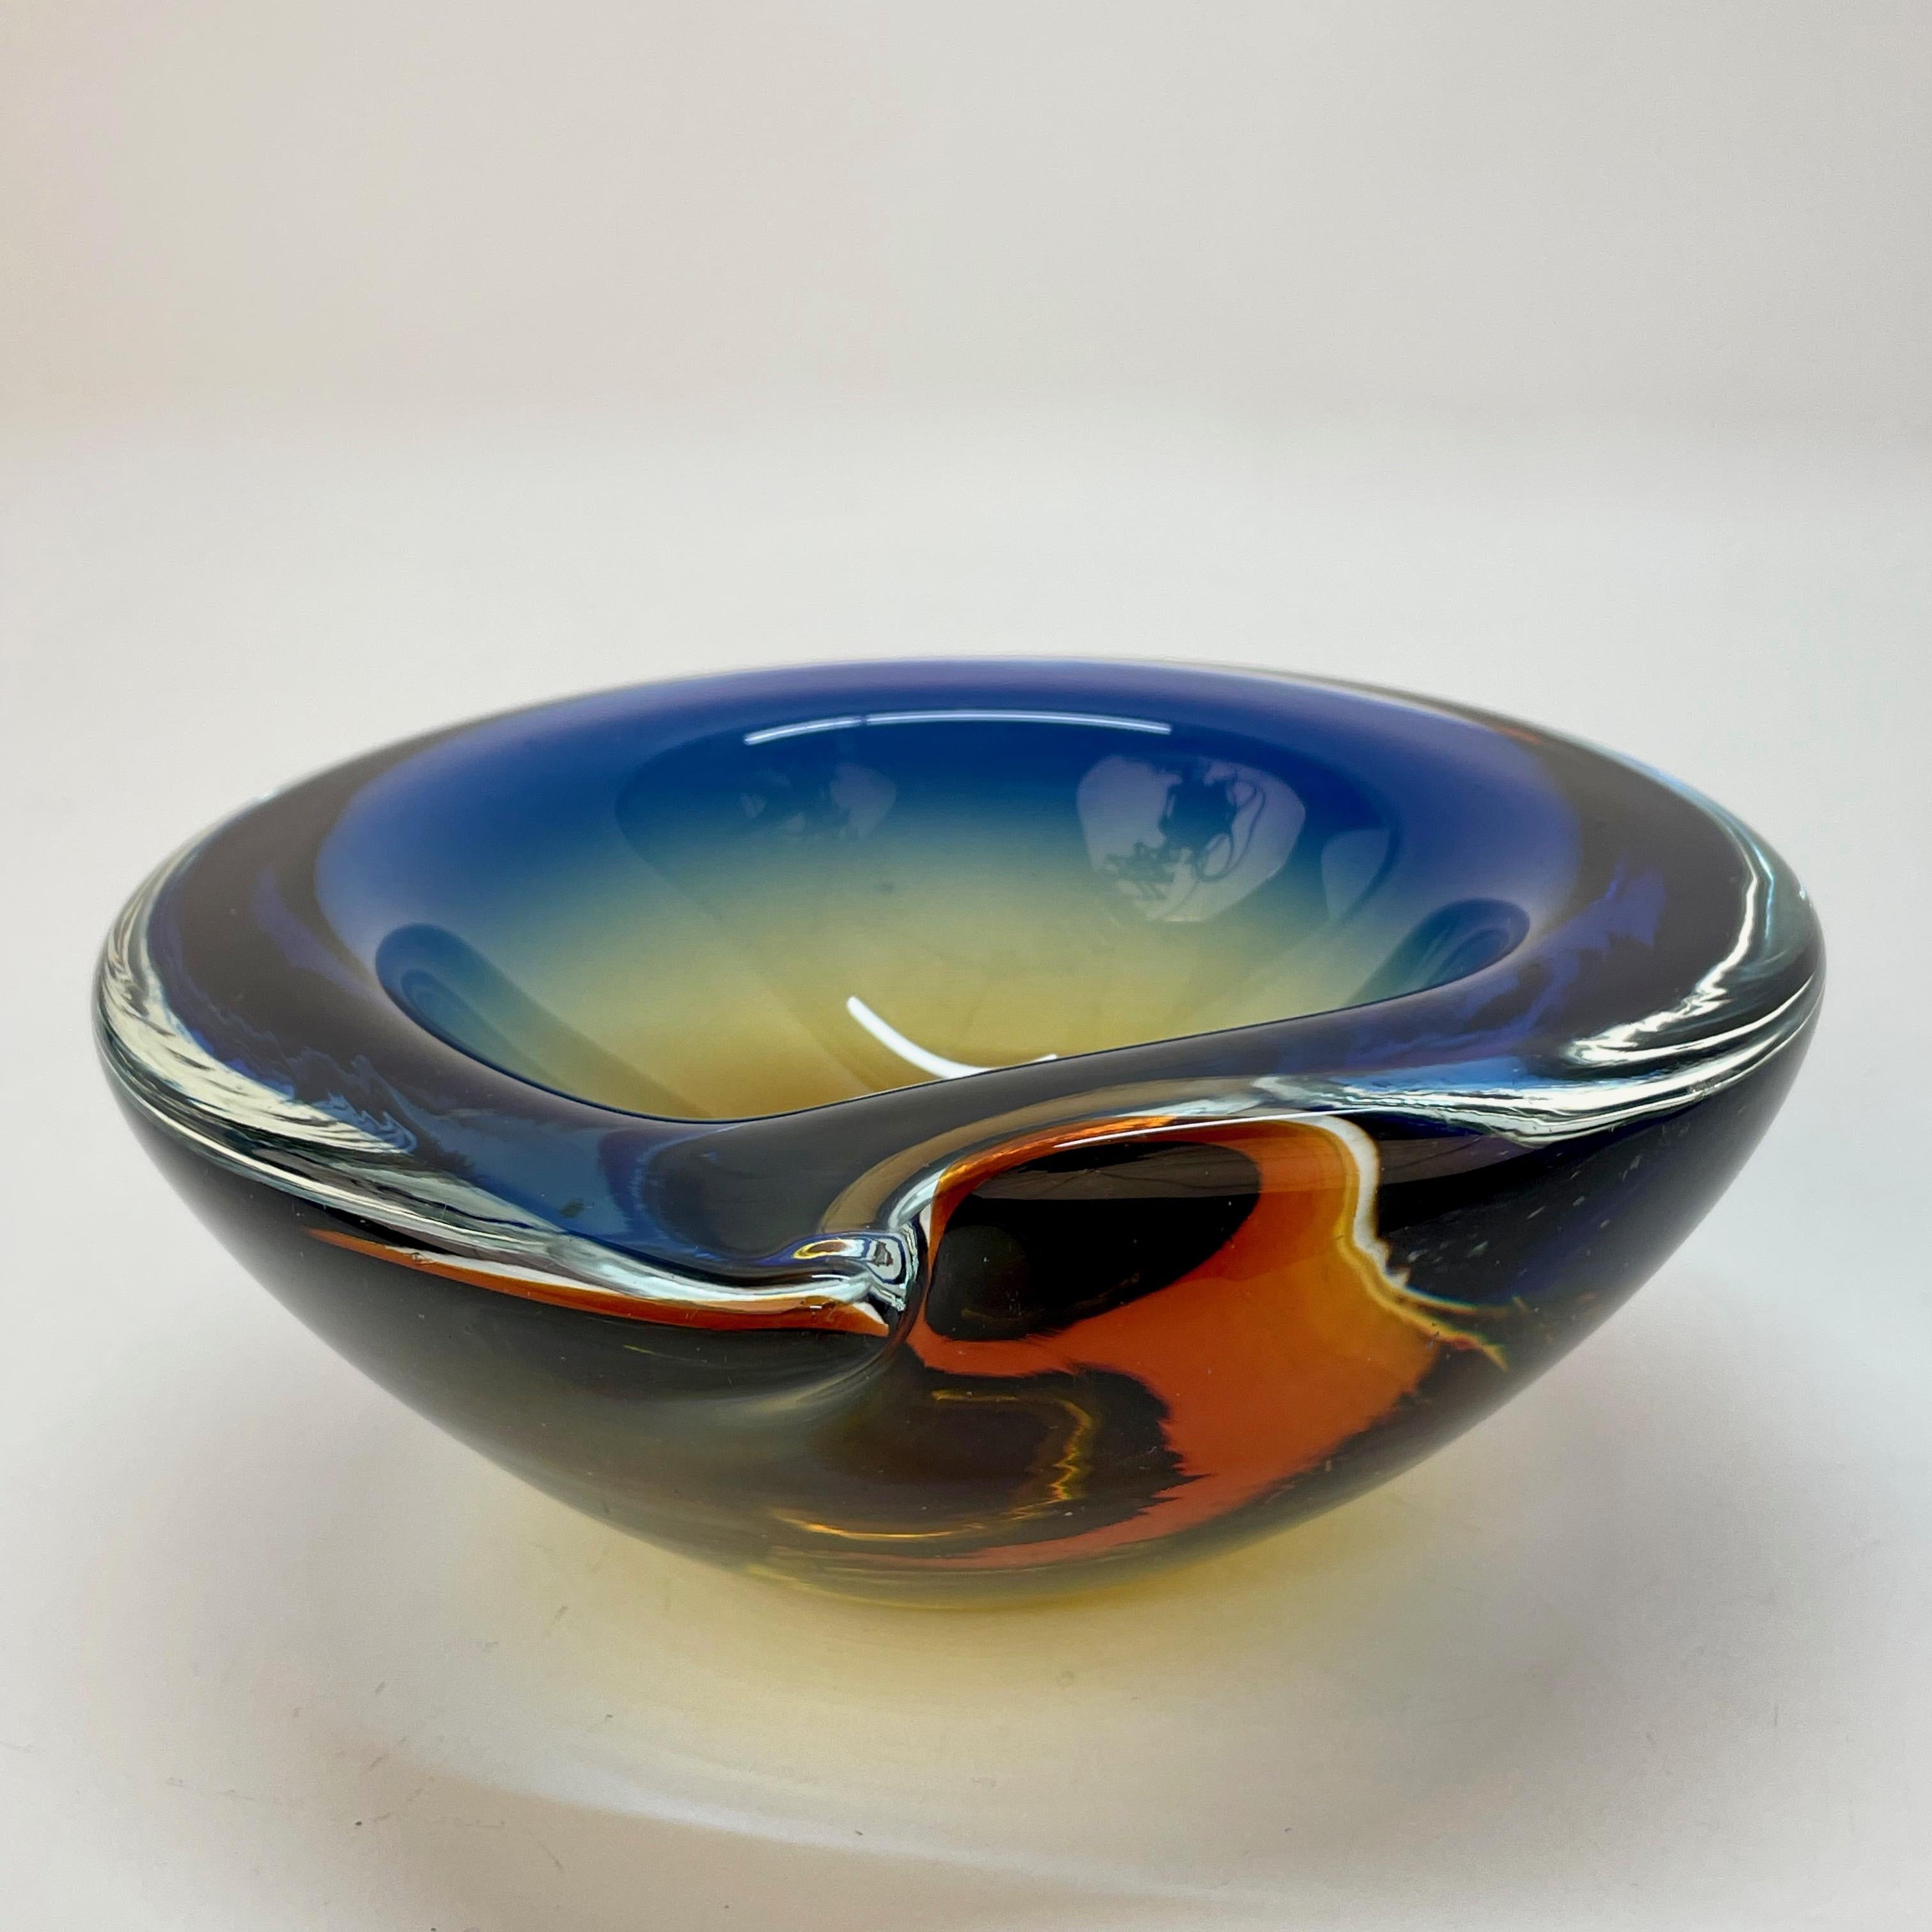 Murano Ashtray or Bowl, Flavio Poli Submerged Glass Amber Blue, Italy, 1960 For Sale 9